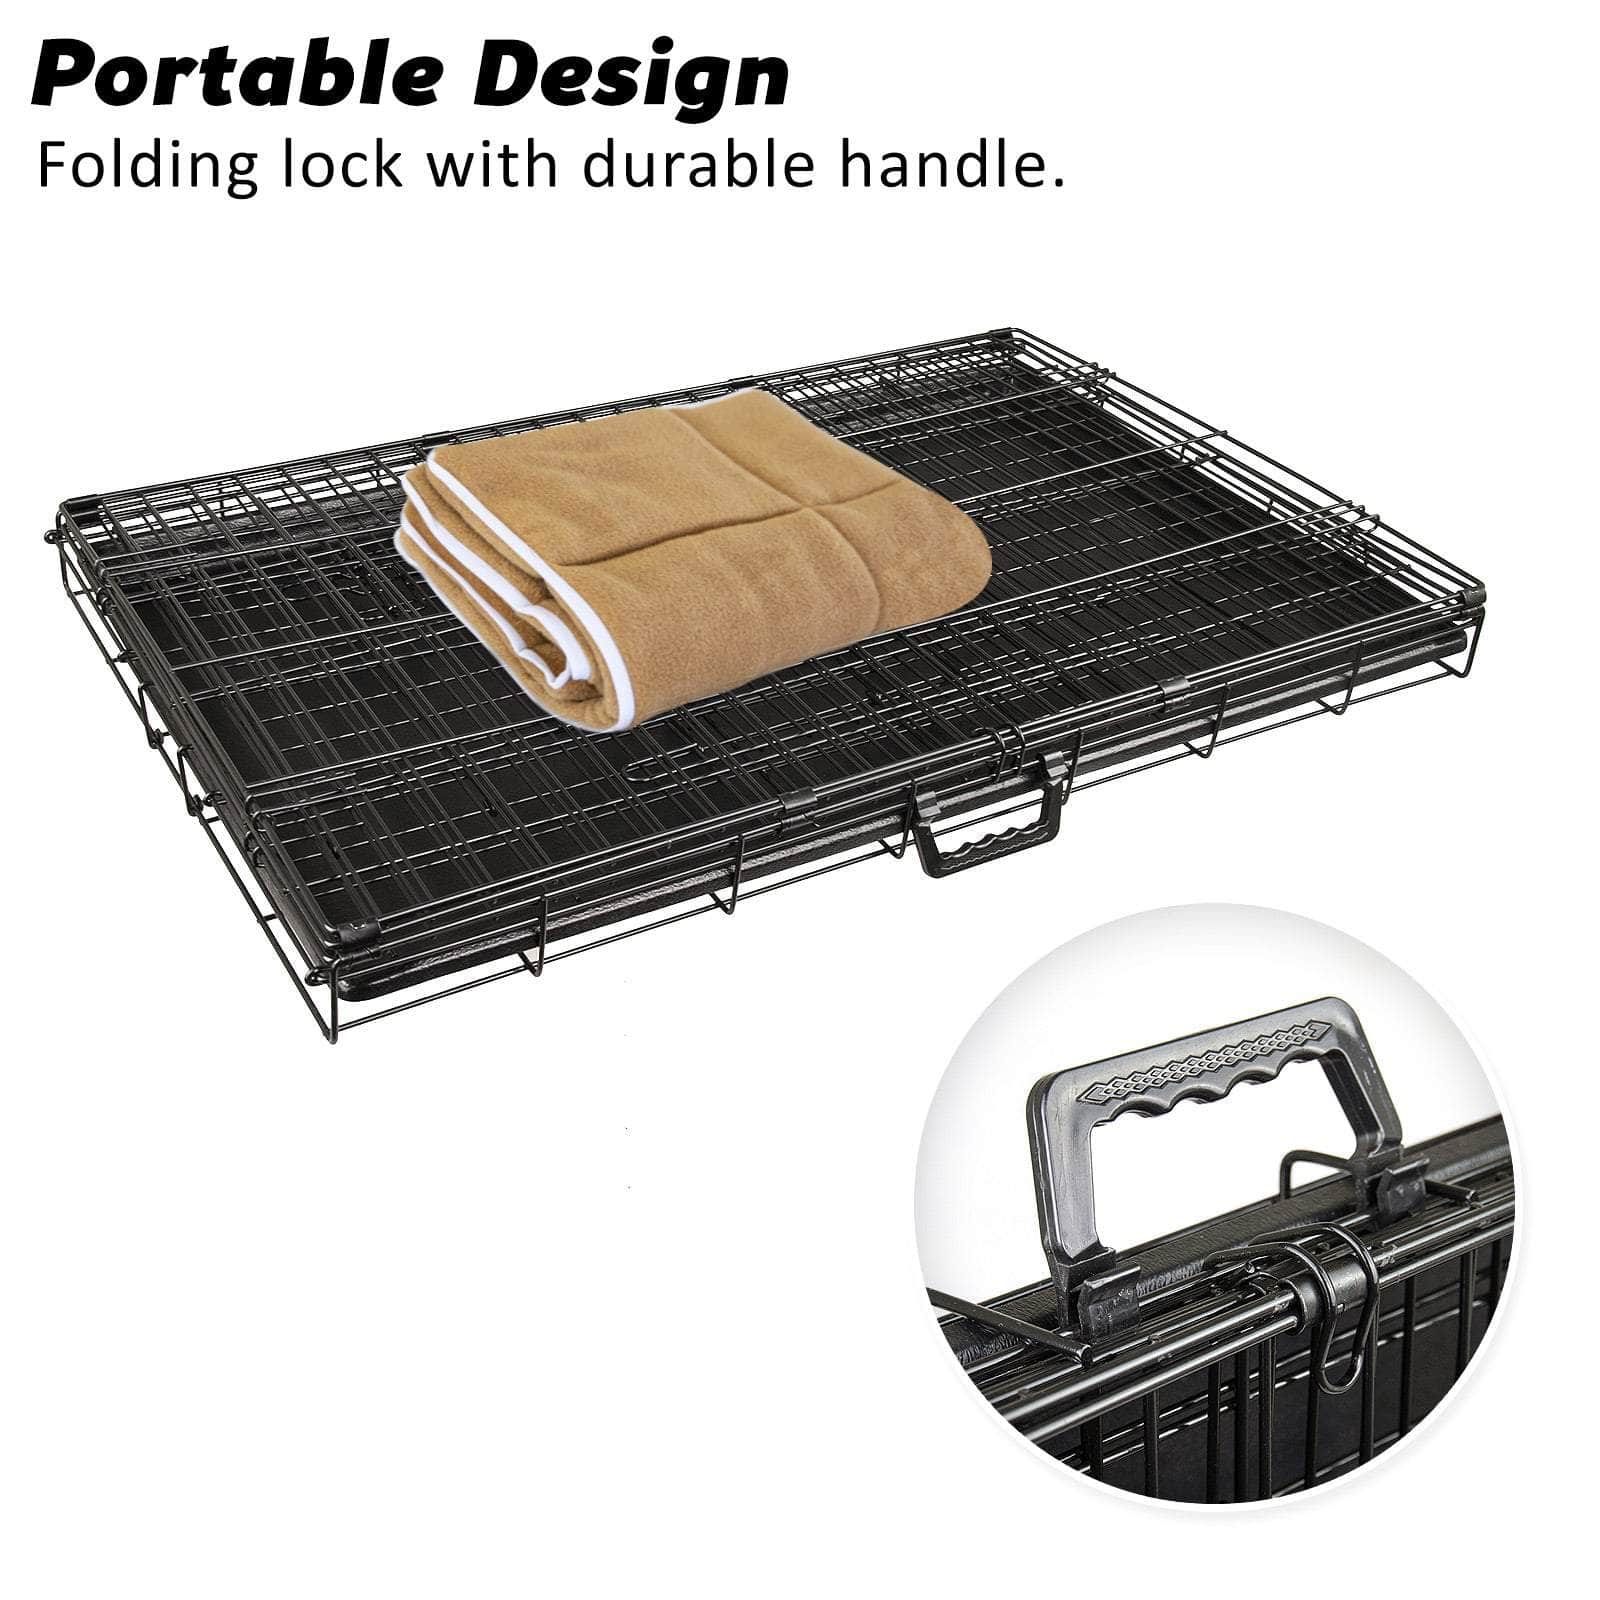 Wire Dog Cage Foldable Crate Kennel 24In With Tray + Cushion Mat Combo